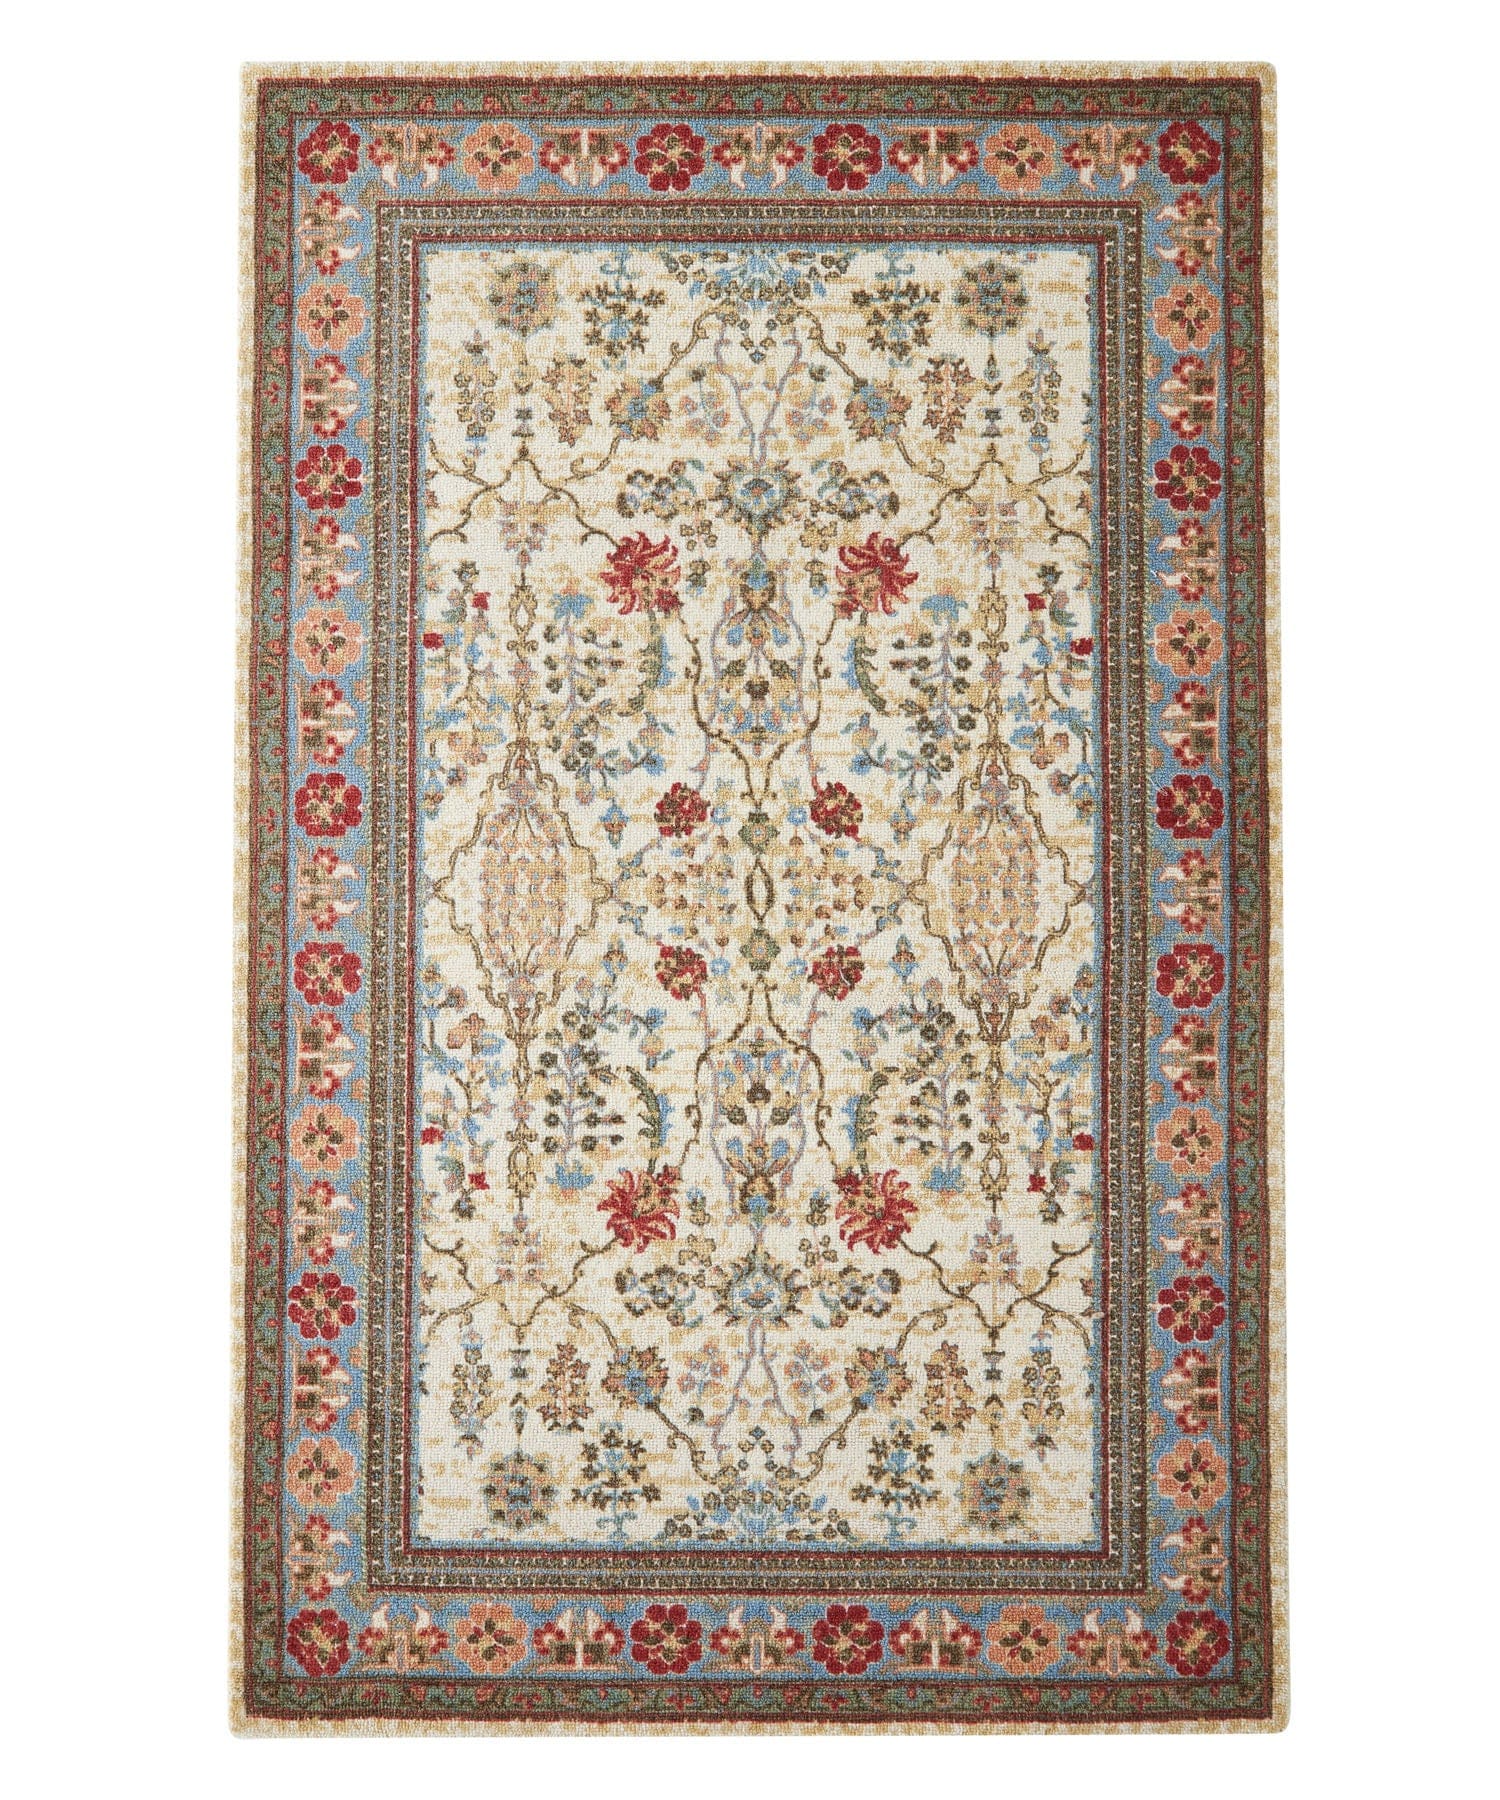 1 Rug  of 1.5 M X 2.4 M ₹18899/-